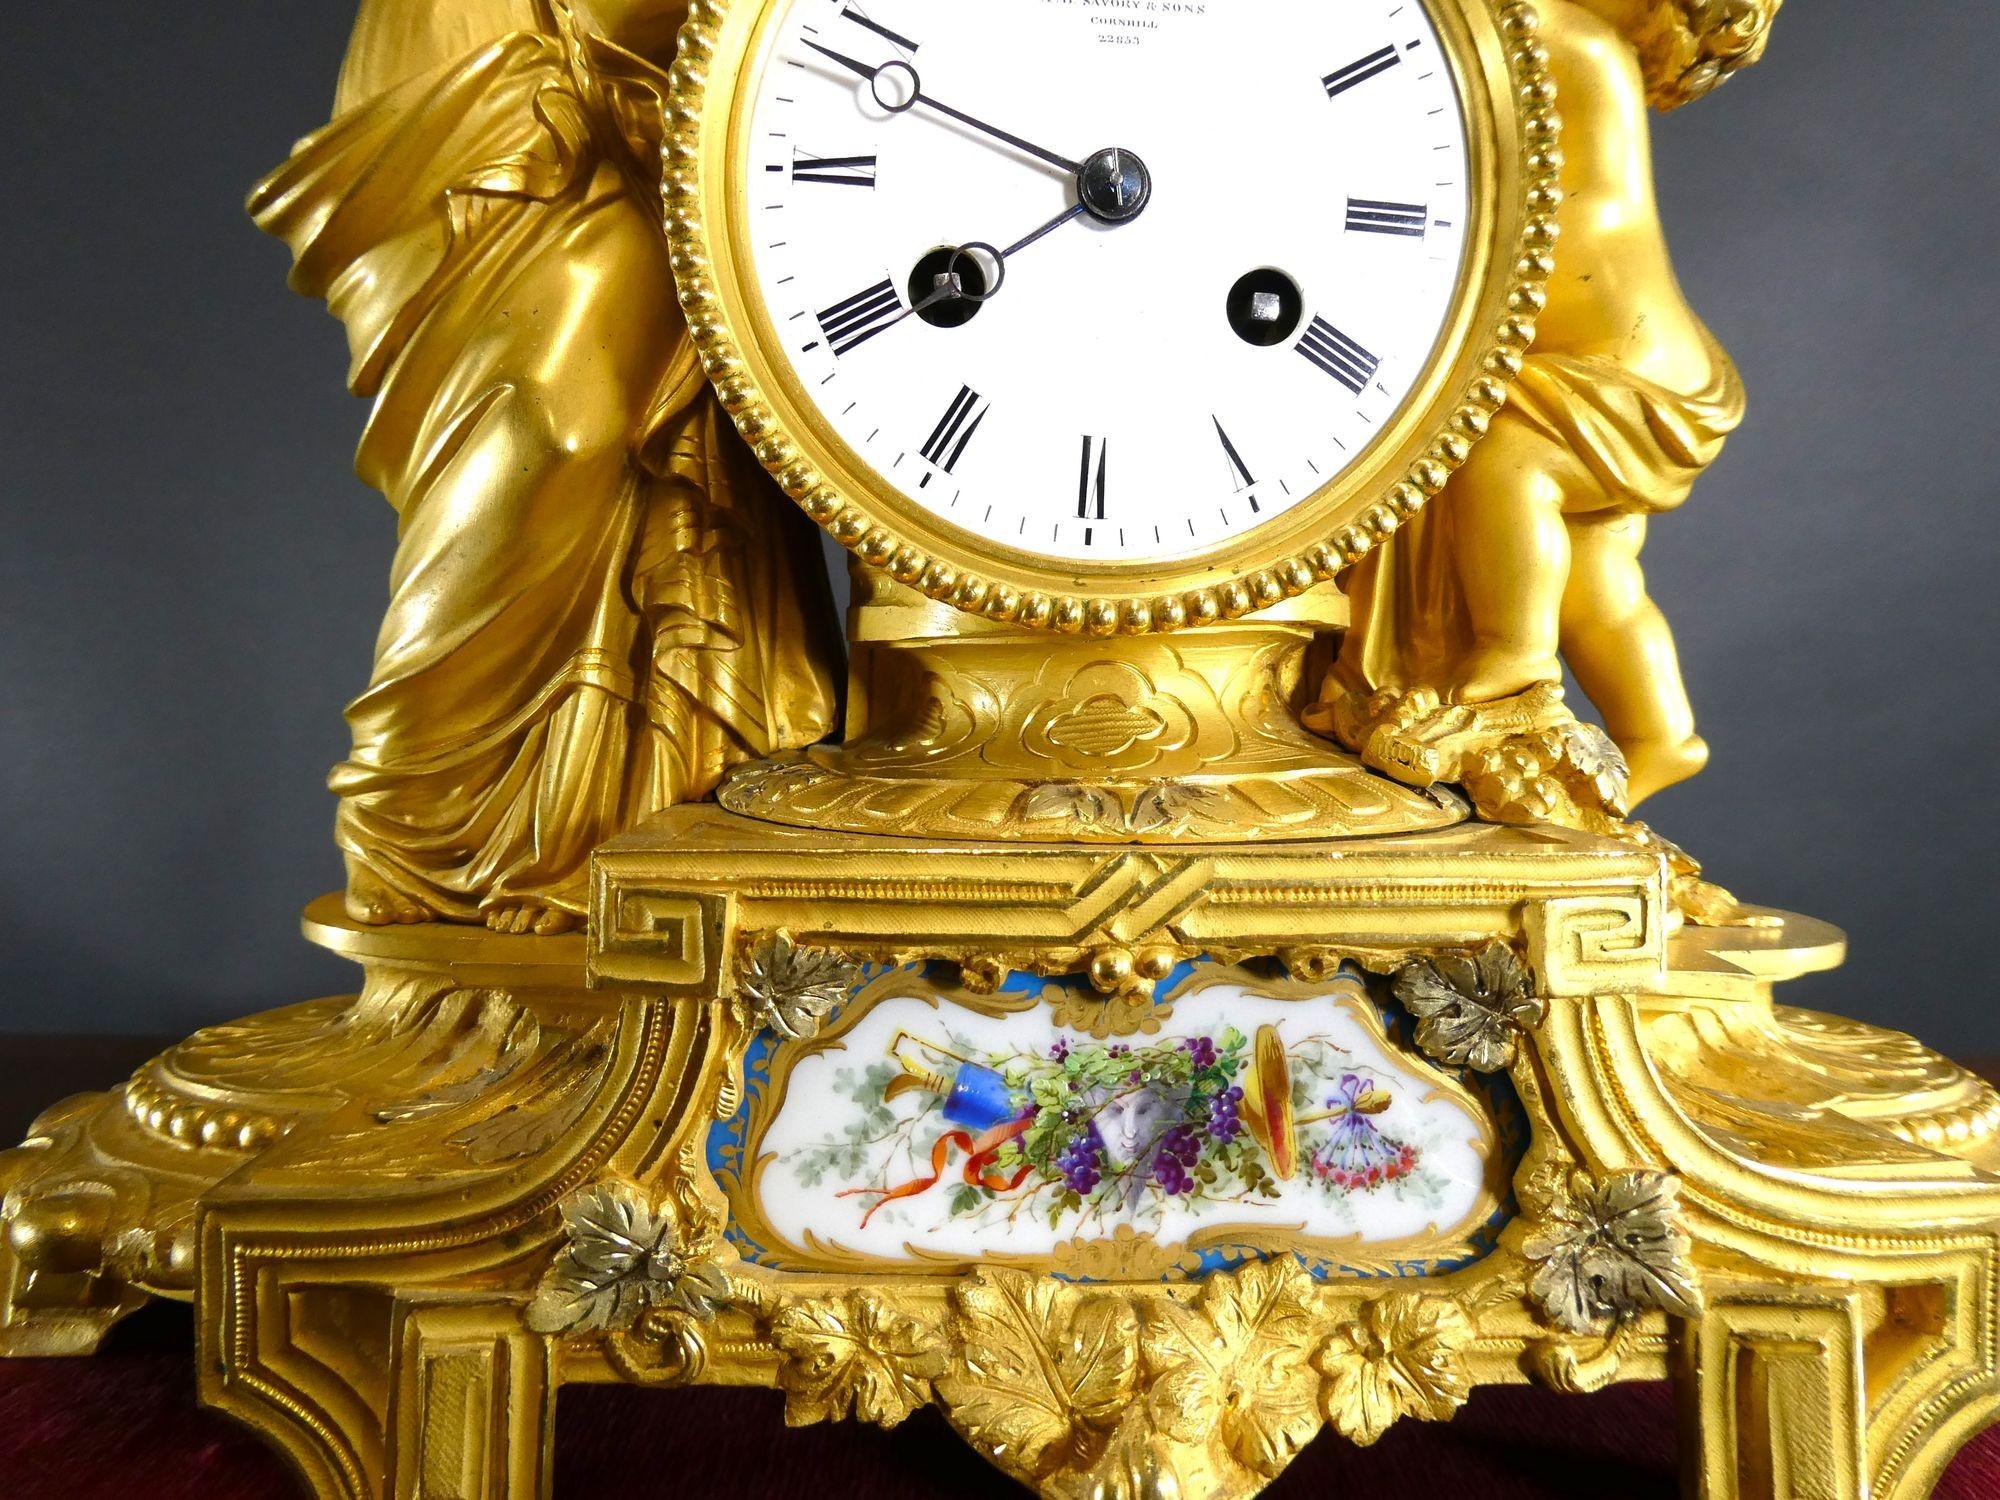 Mid-19th Century Ormolu and Porcelain Panel Mantel Clock, A.B.Savory, Cornhill For Sale